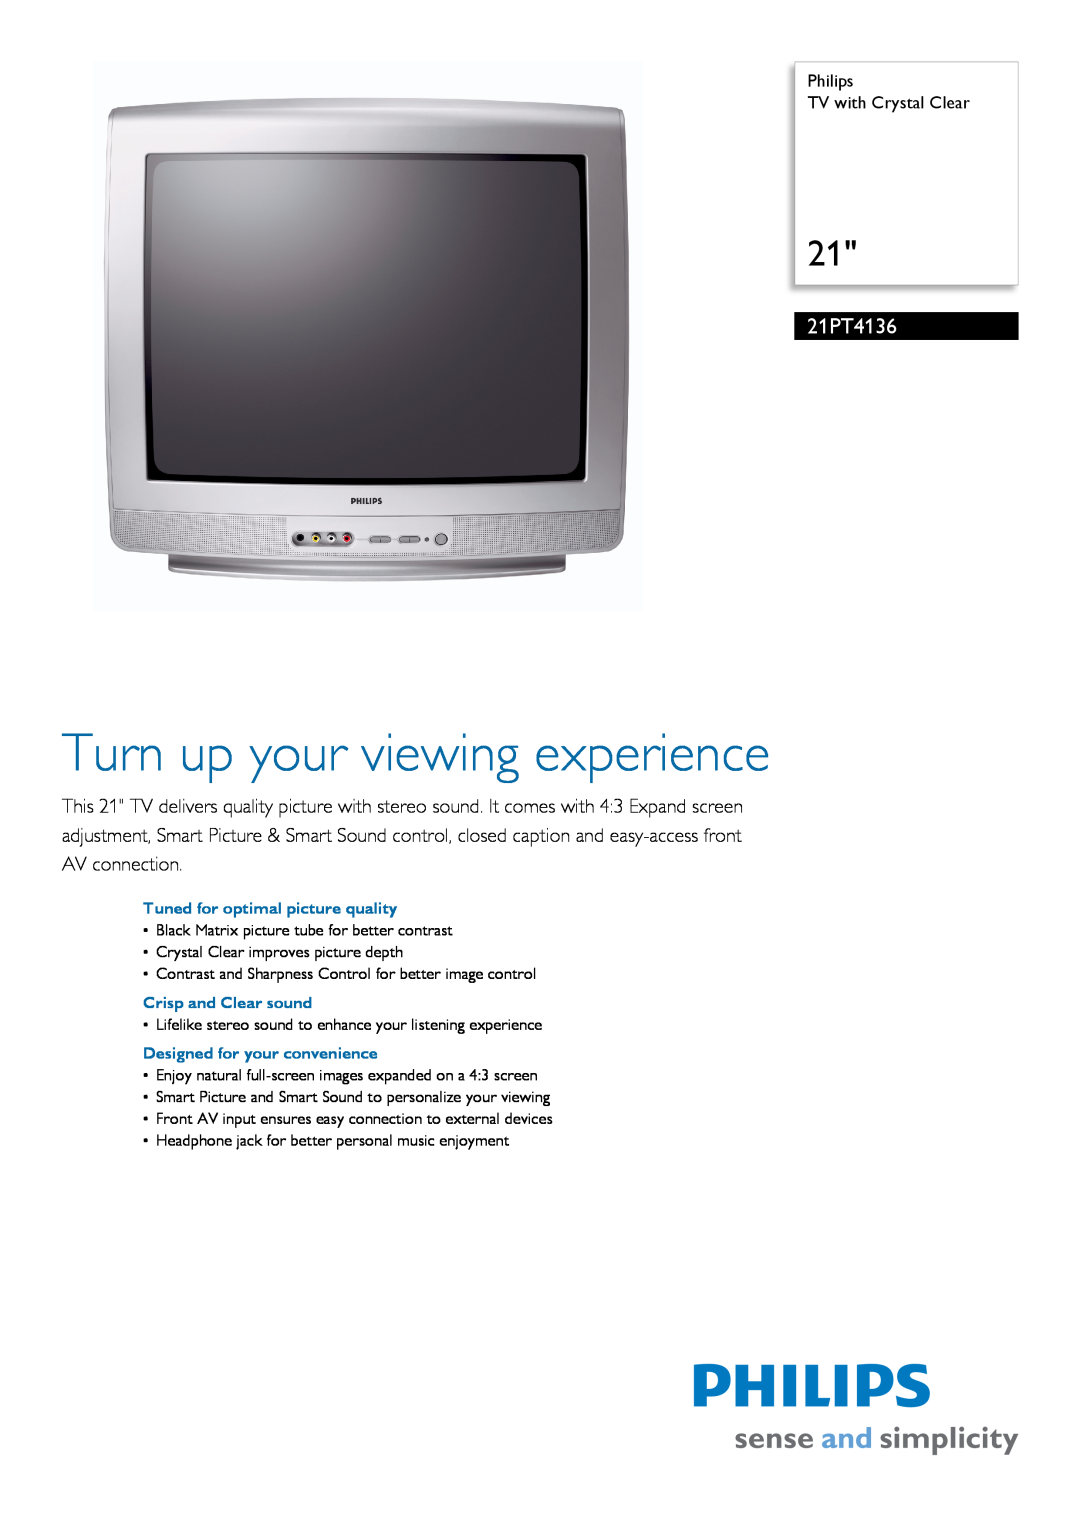 Philips 21PT4136 manual Philips TV with Crystal Clear, Turn up your viewing experience 